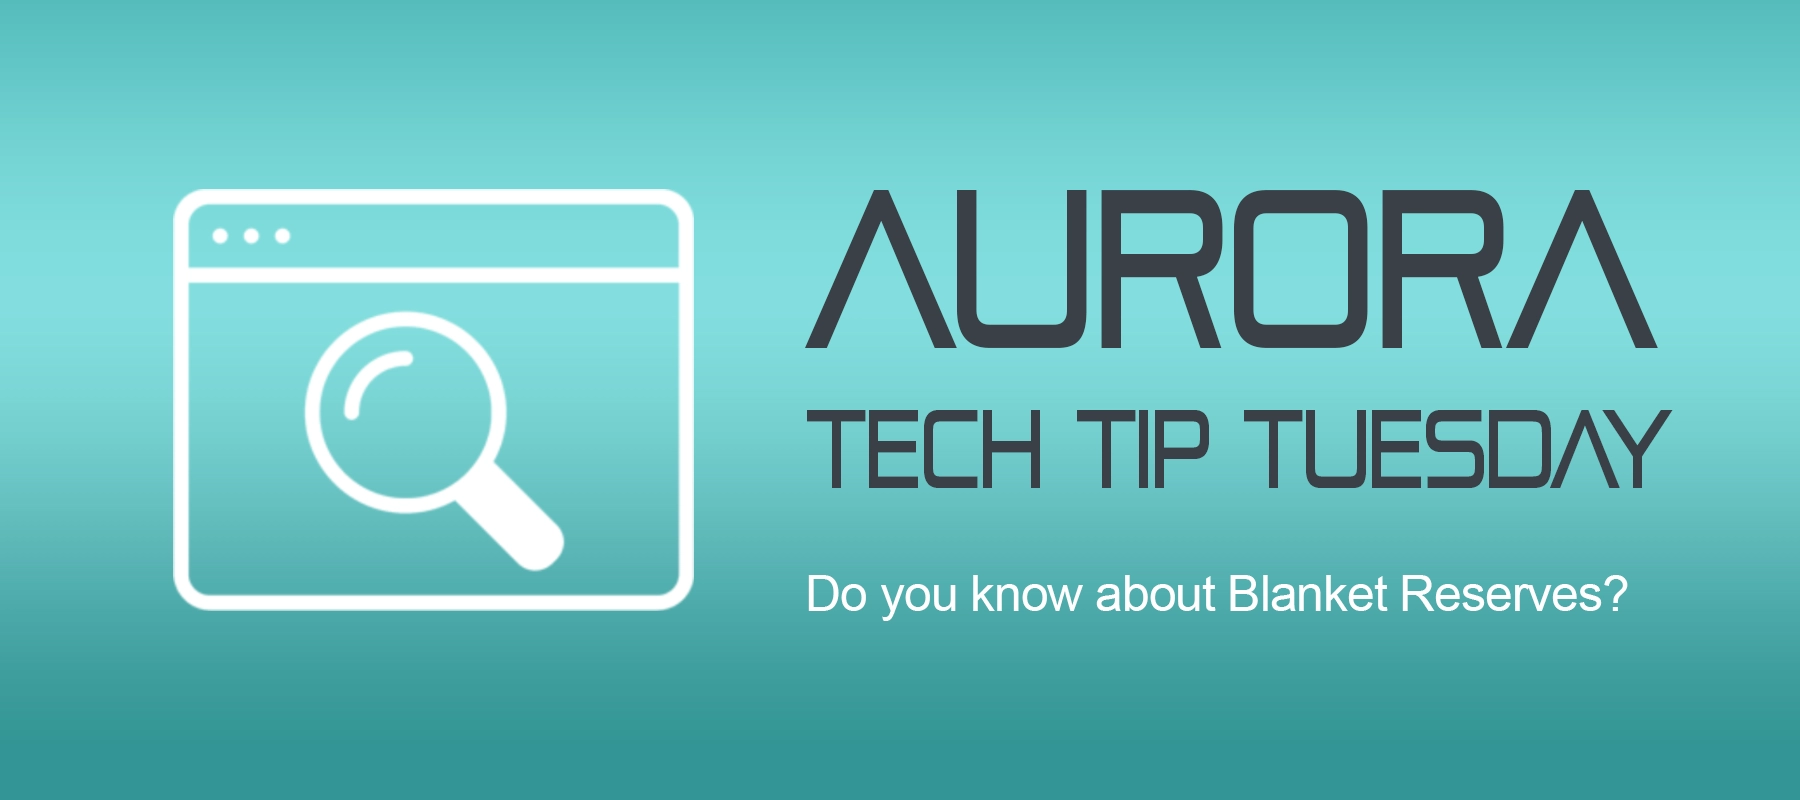 Tech Tip Tuesday - Blanket Reserve